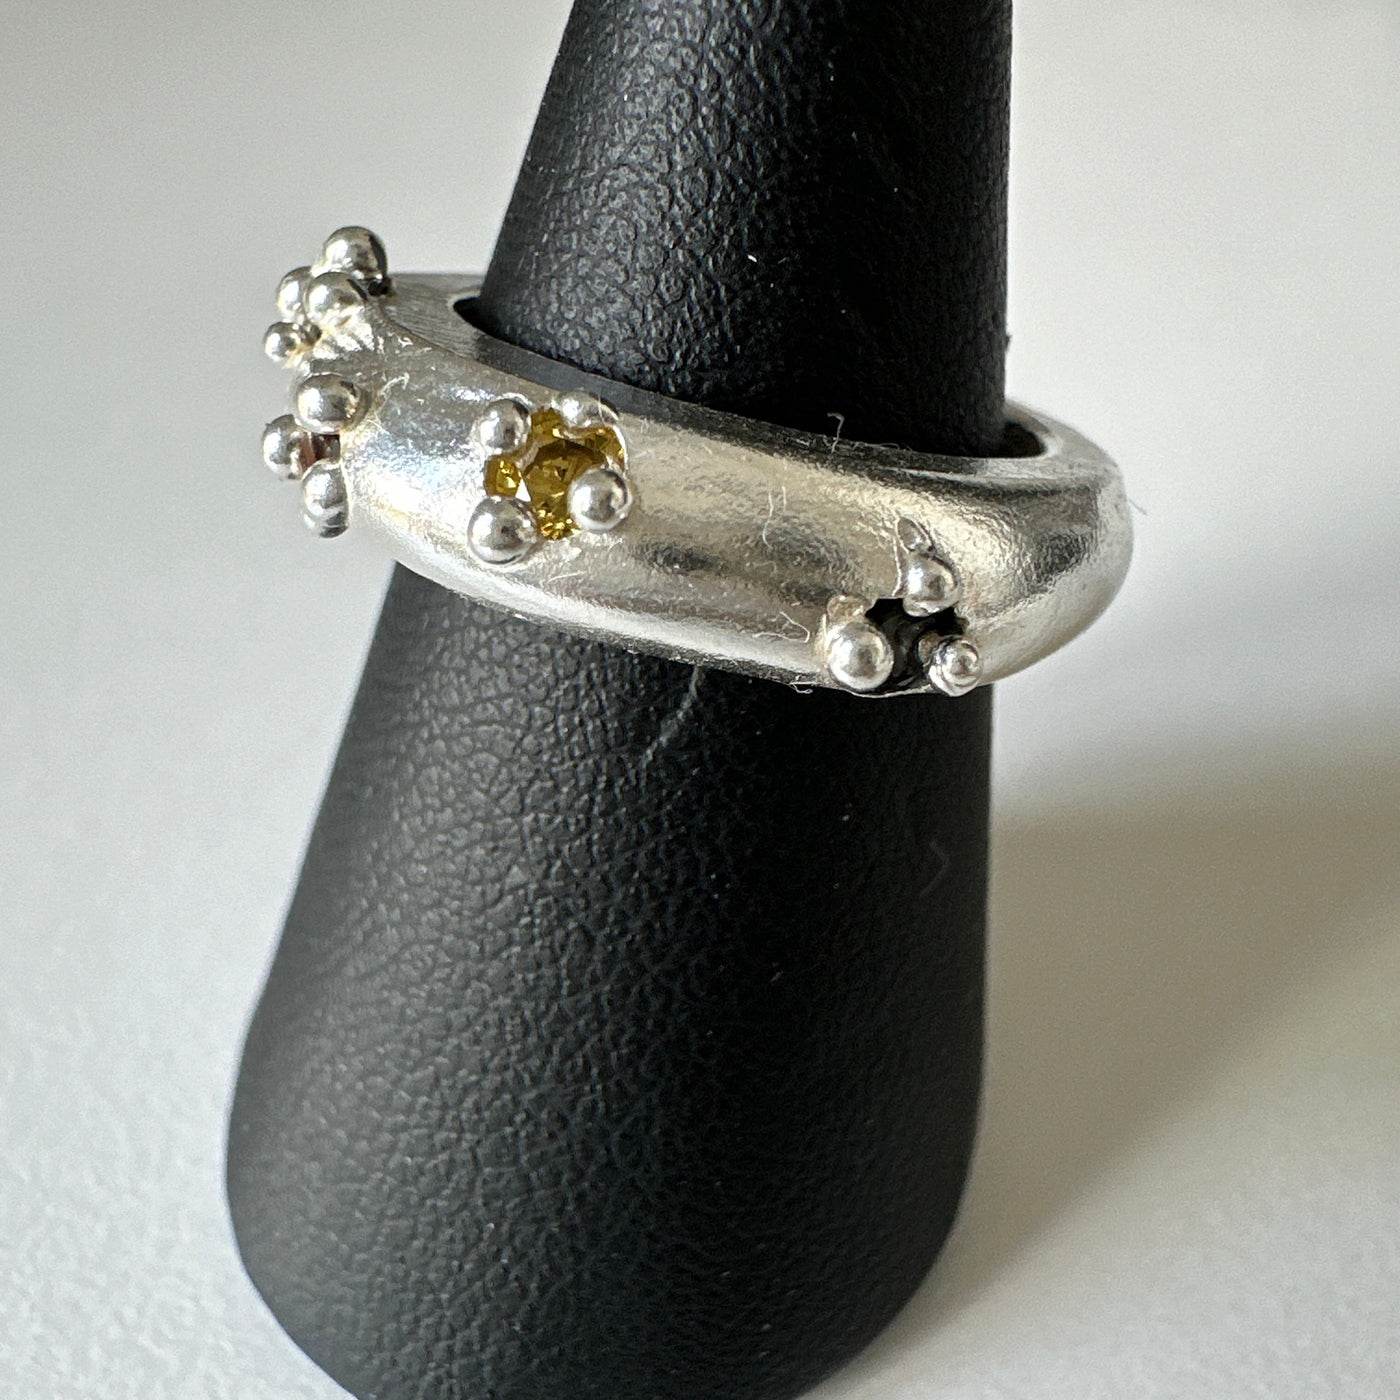 Flowers ring- sterling silver casted with 4 cubic zirconia